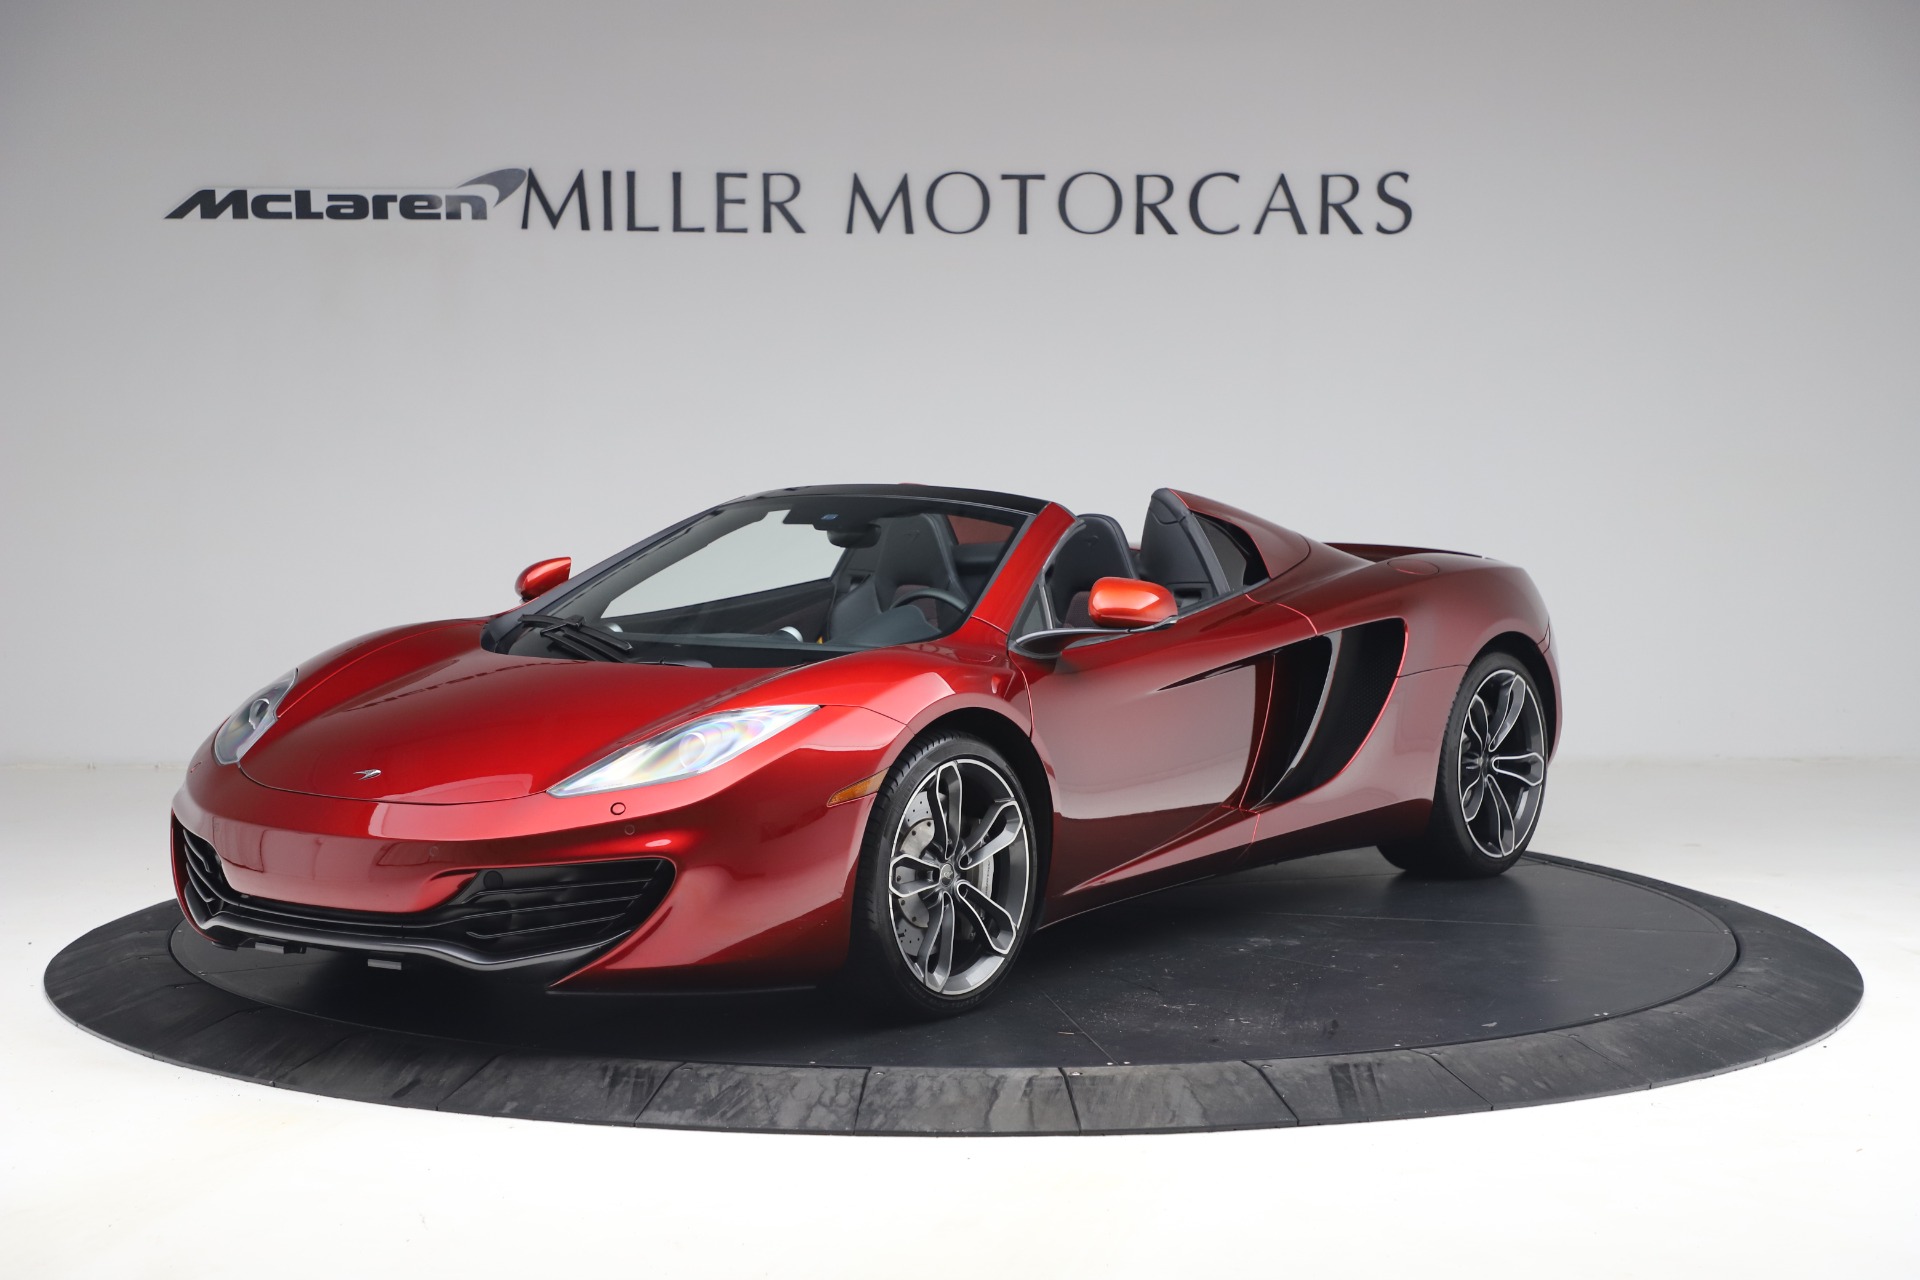 Used 2013 McLaren MP4-12C Spider for sale Sold at Aston Martin of Greenwich in Greenwich CT 06830 1